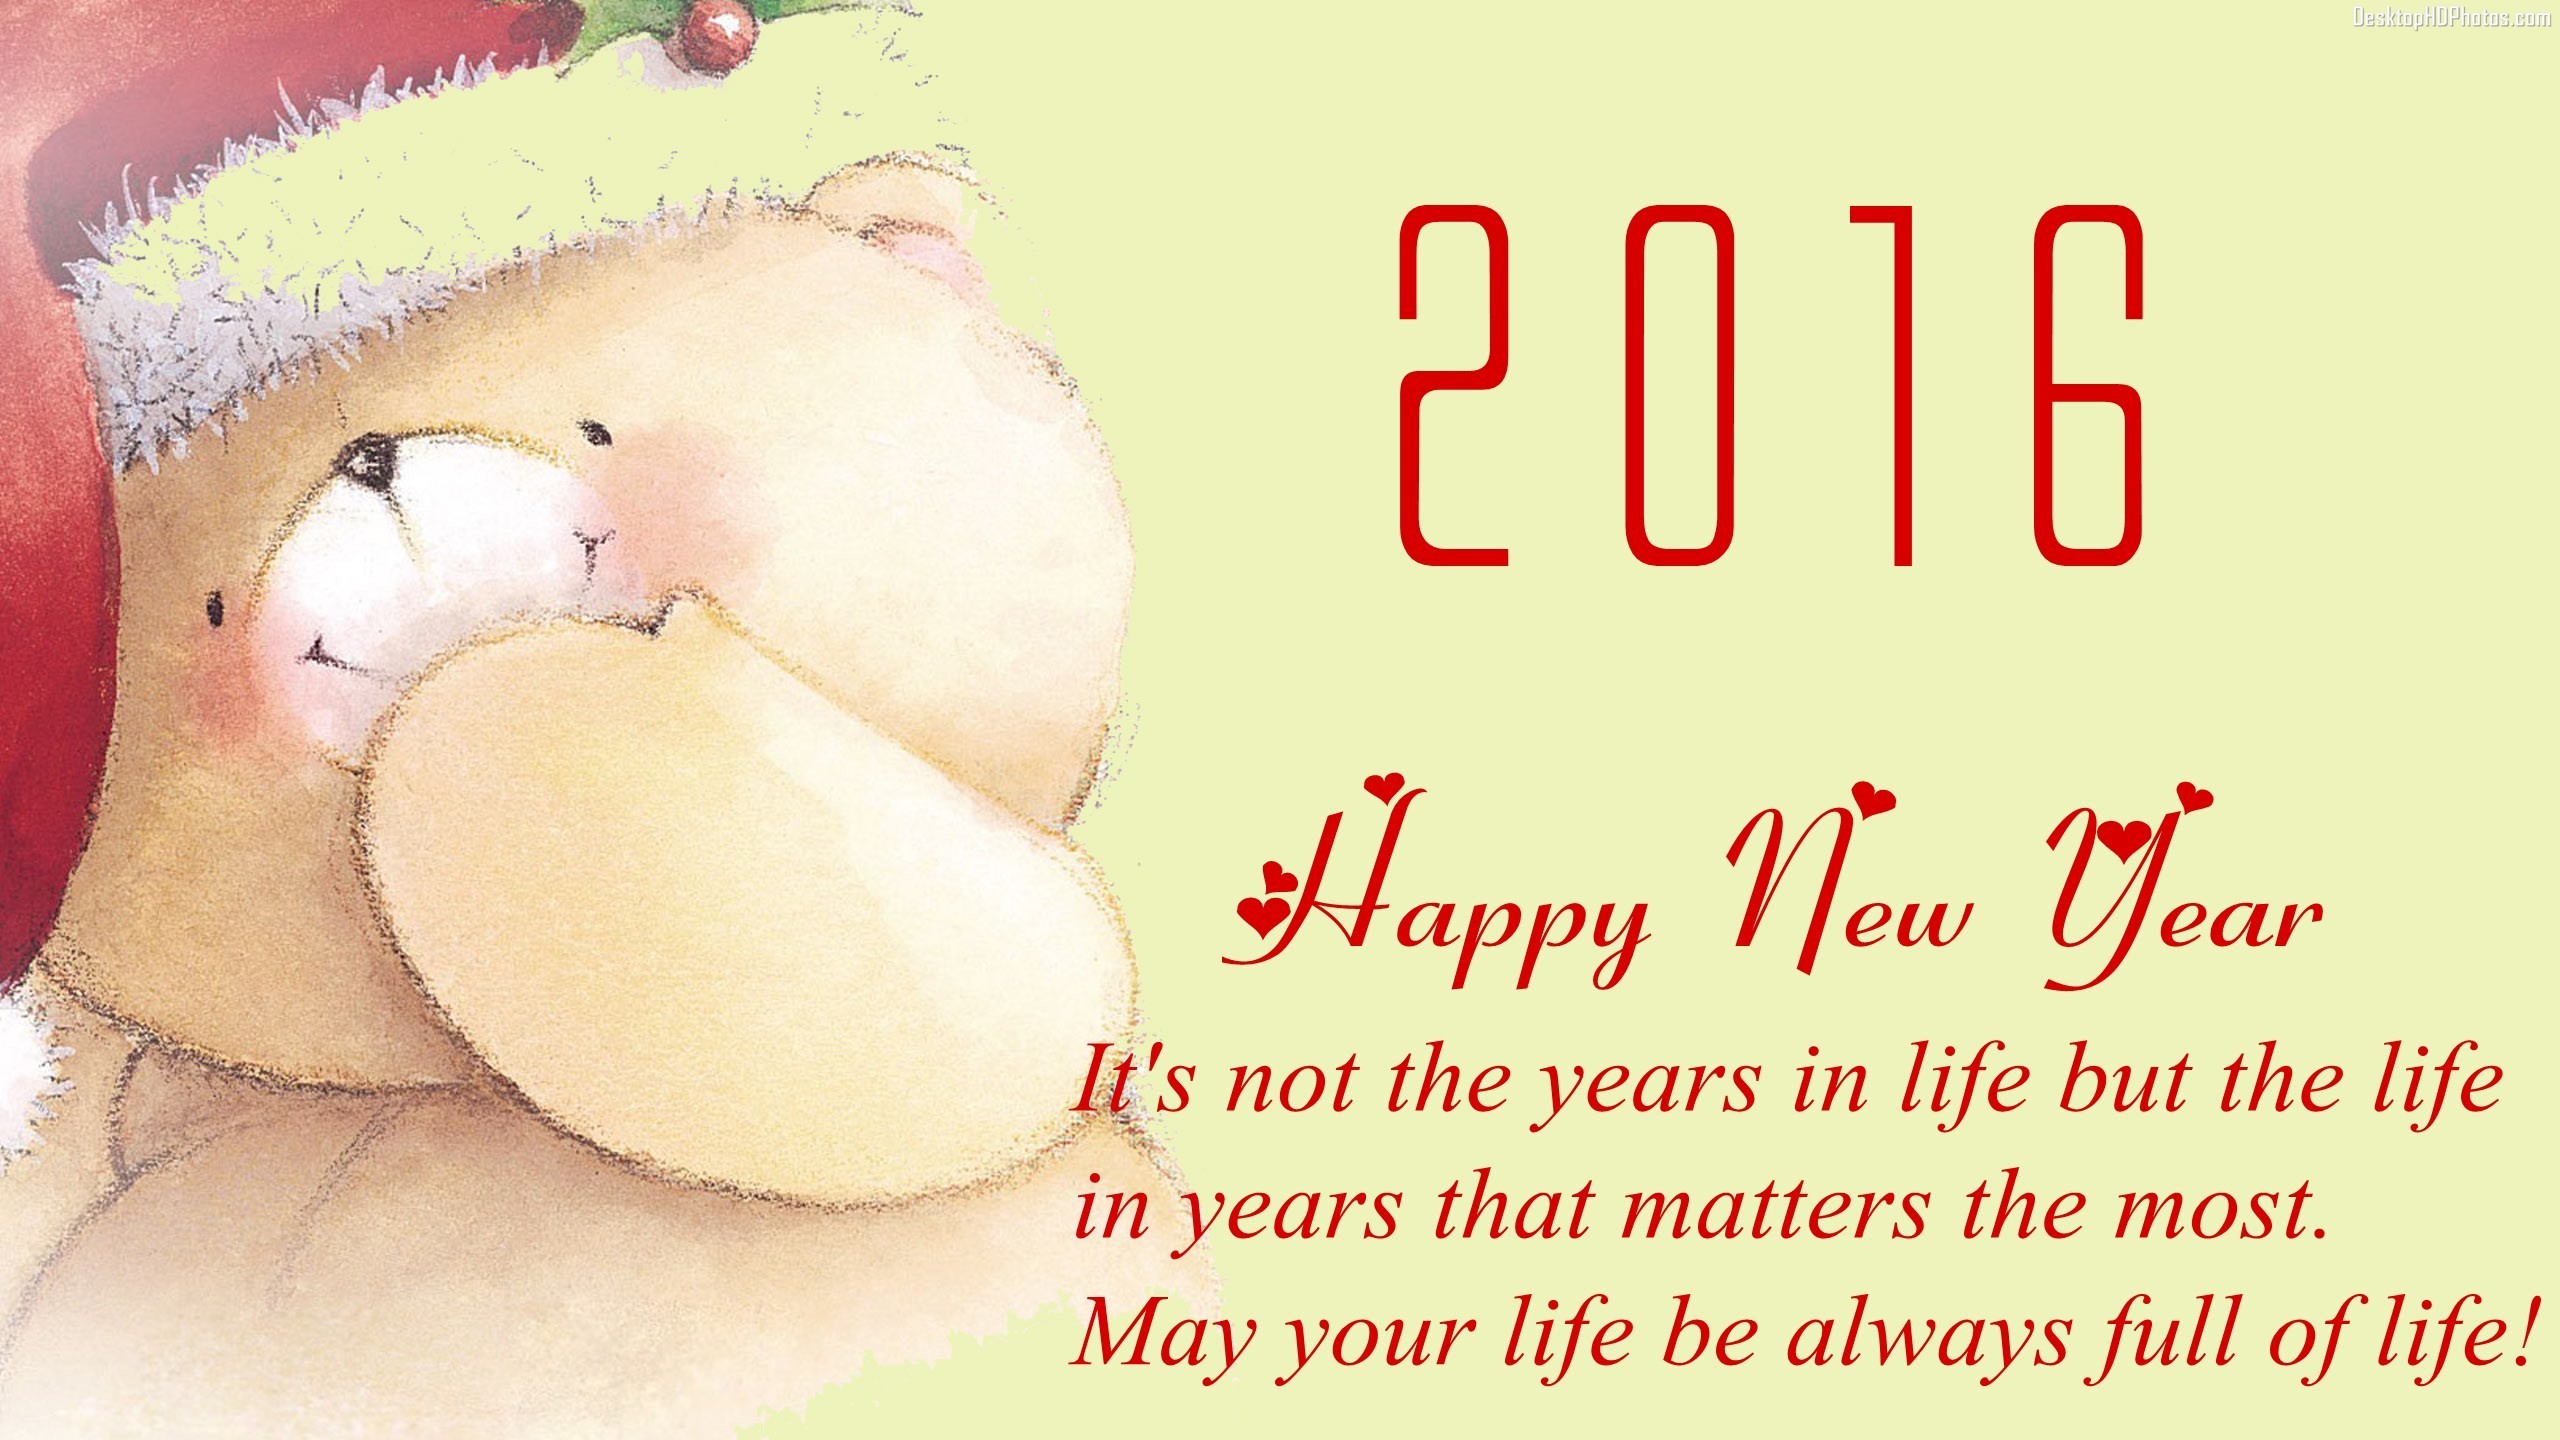 2560x1440 Happy New Year 2016 Wallpapers, Desktop Backgrounds, Images